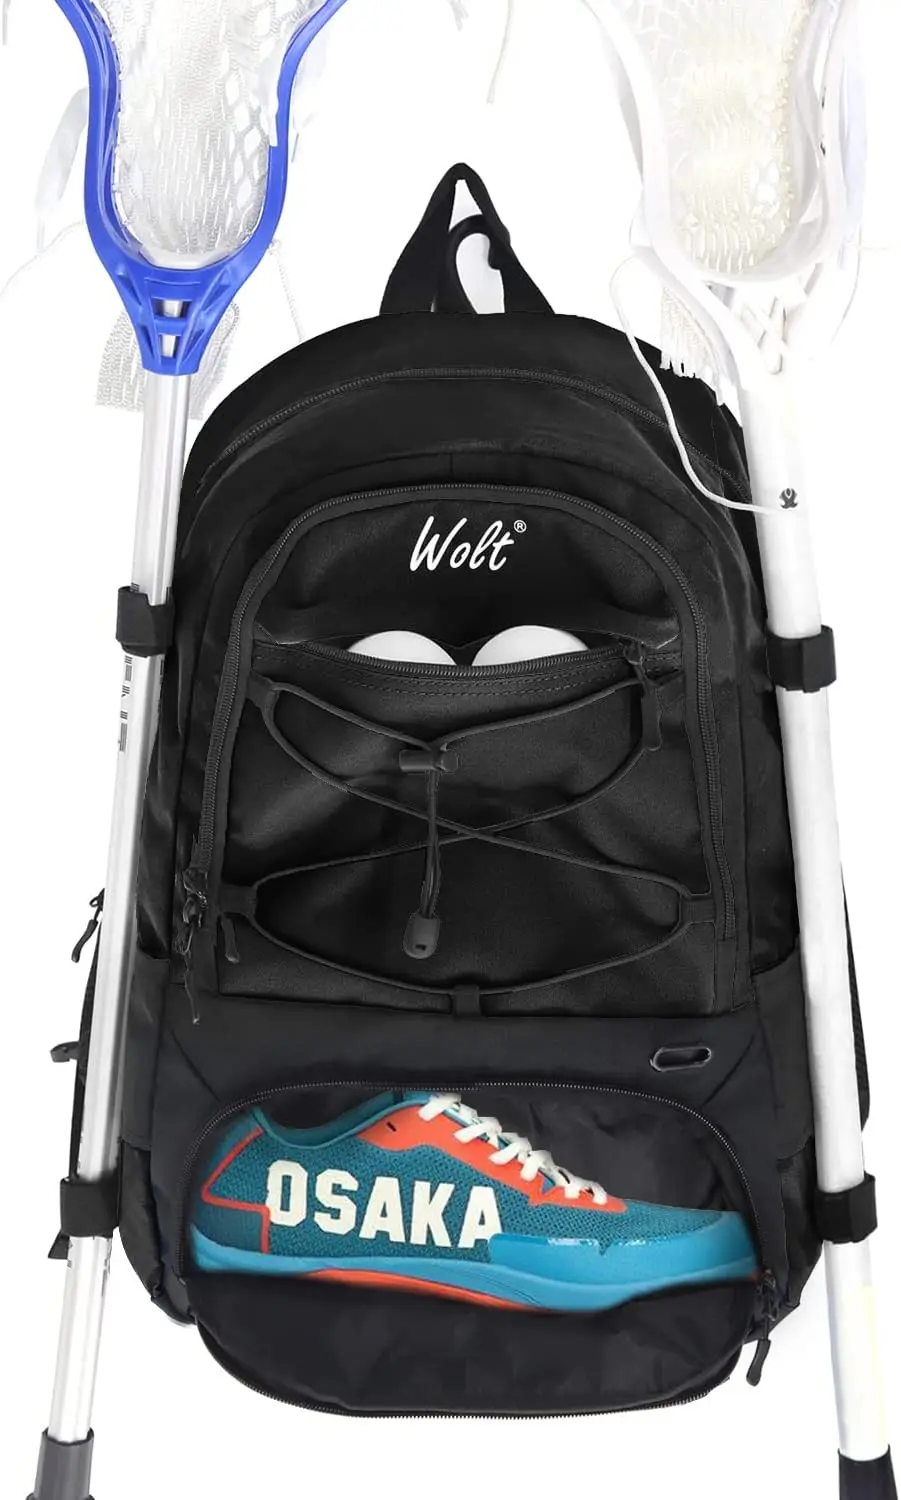 

Turf Lacrosse Backpack Bag - Extra Large Storage Room for Holding All Lacrosse or Field Hockey Equipment, Two Stick Holders and